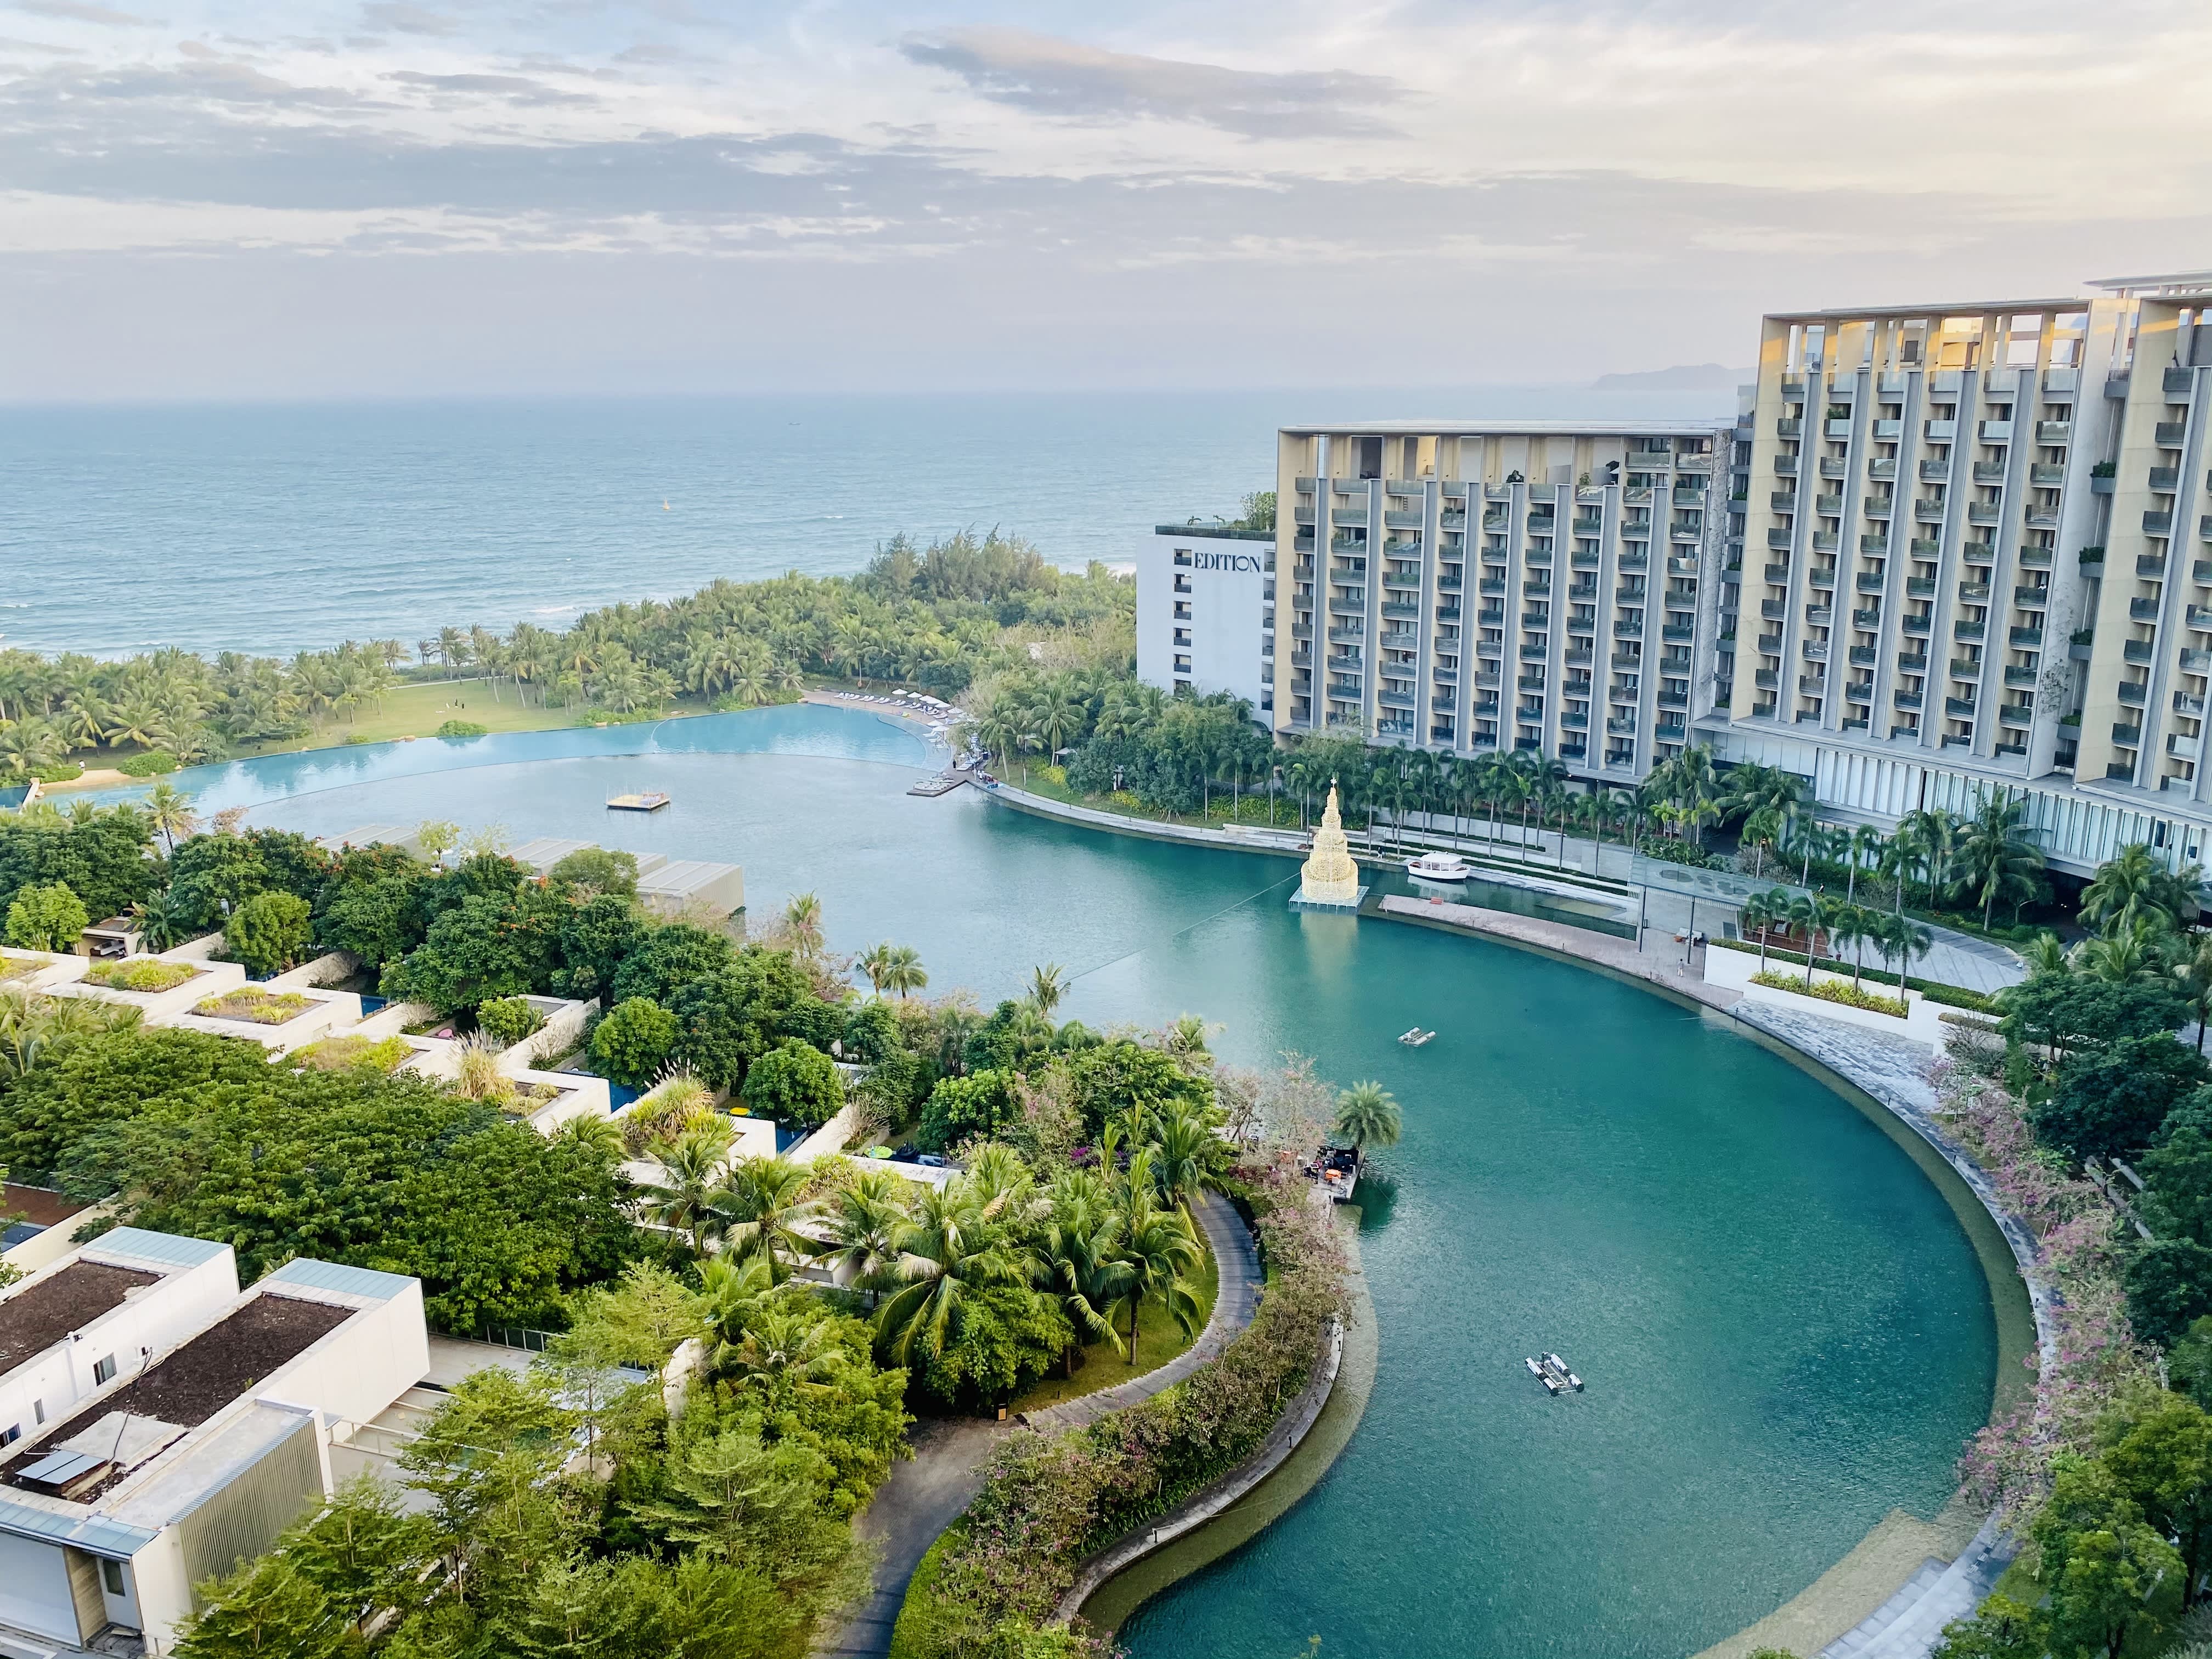 10 Best Marriott Vacation Club Resorts You Should Visit